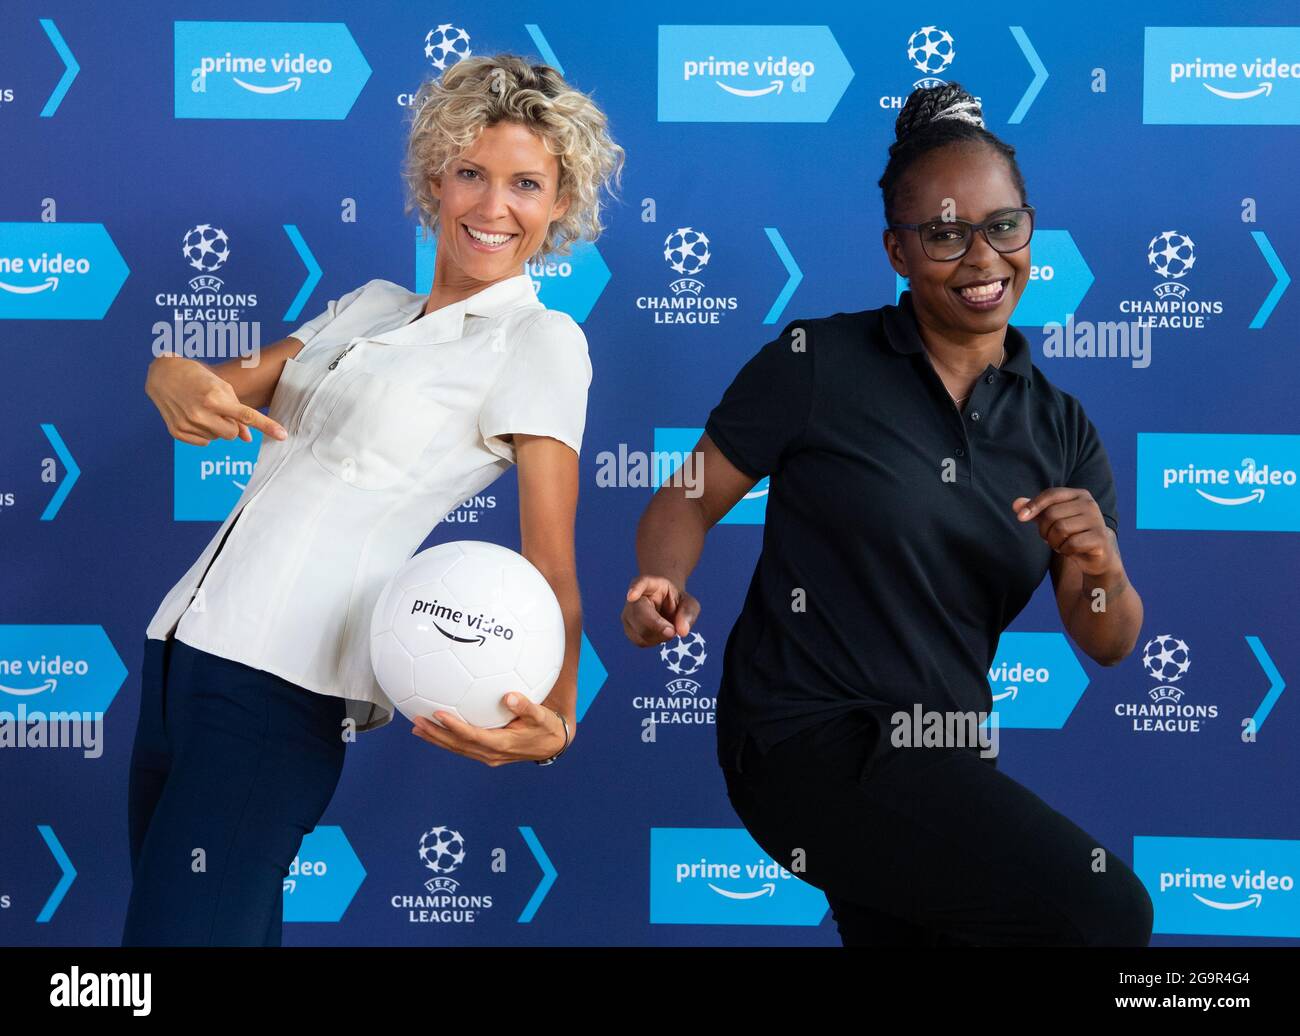 Munich, Germany. 27th July, 2021. Annika Zimmermann (l), host and reporter,  and Shary Reeves, host and reporter, attend a press conference of Amazon  Prime Video. Amazon will show Champions League matches from